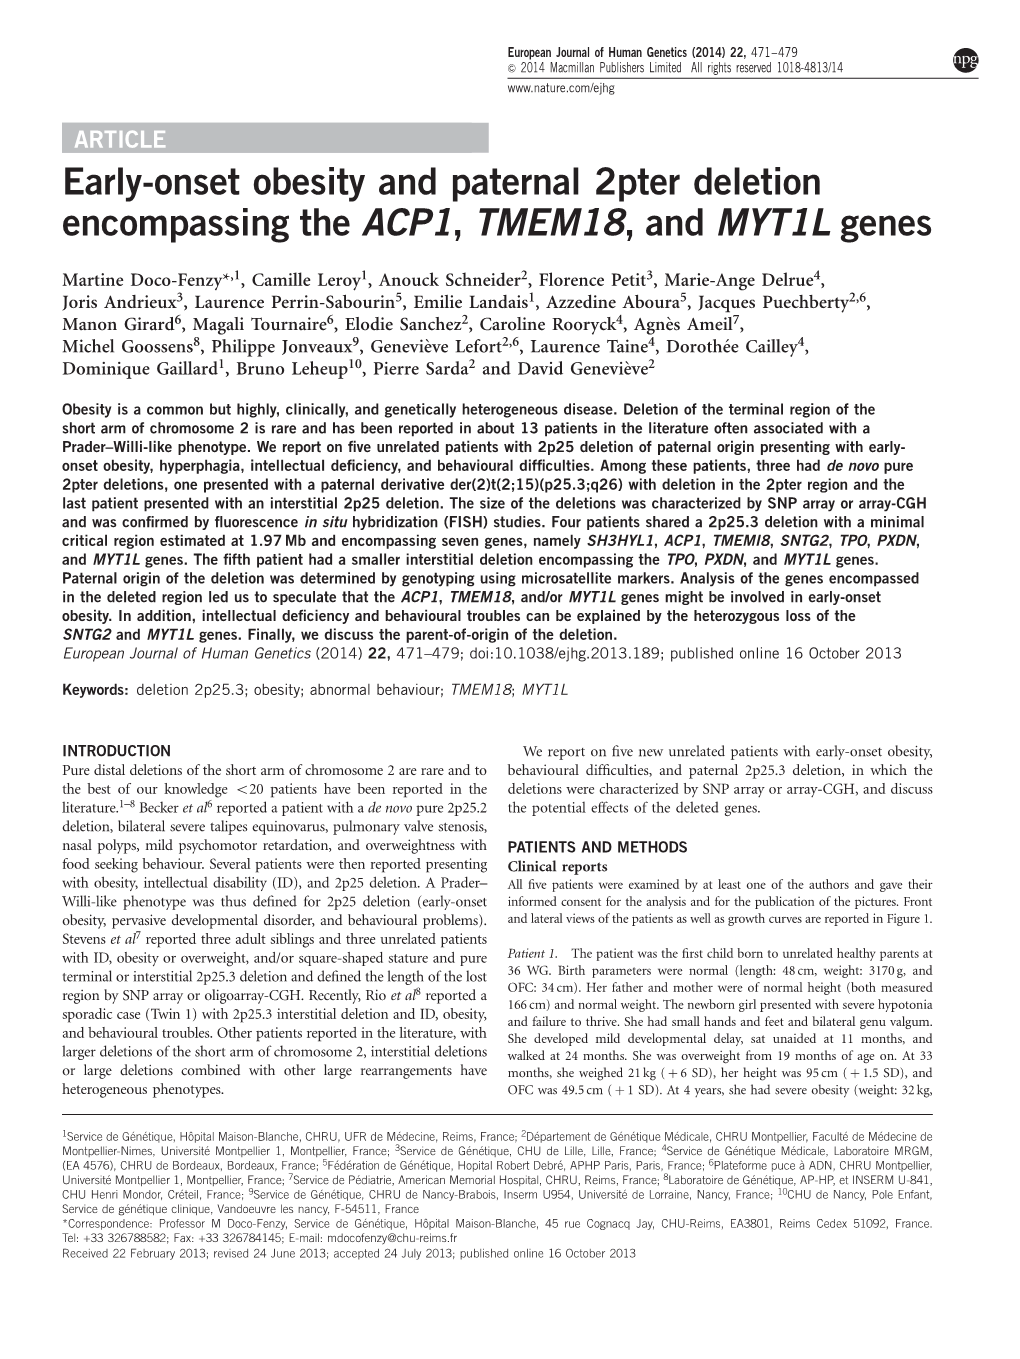 Early-Onset Obesity and Paternal 2Pter Deletion Encompassing the ACP1, TMEM18,Andmyt1l Genes